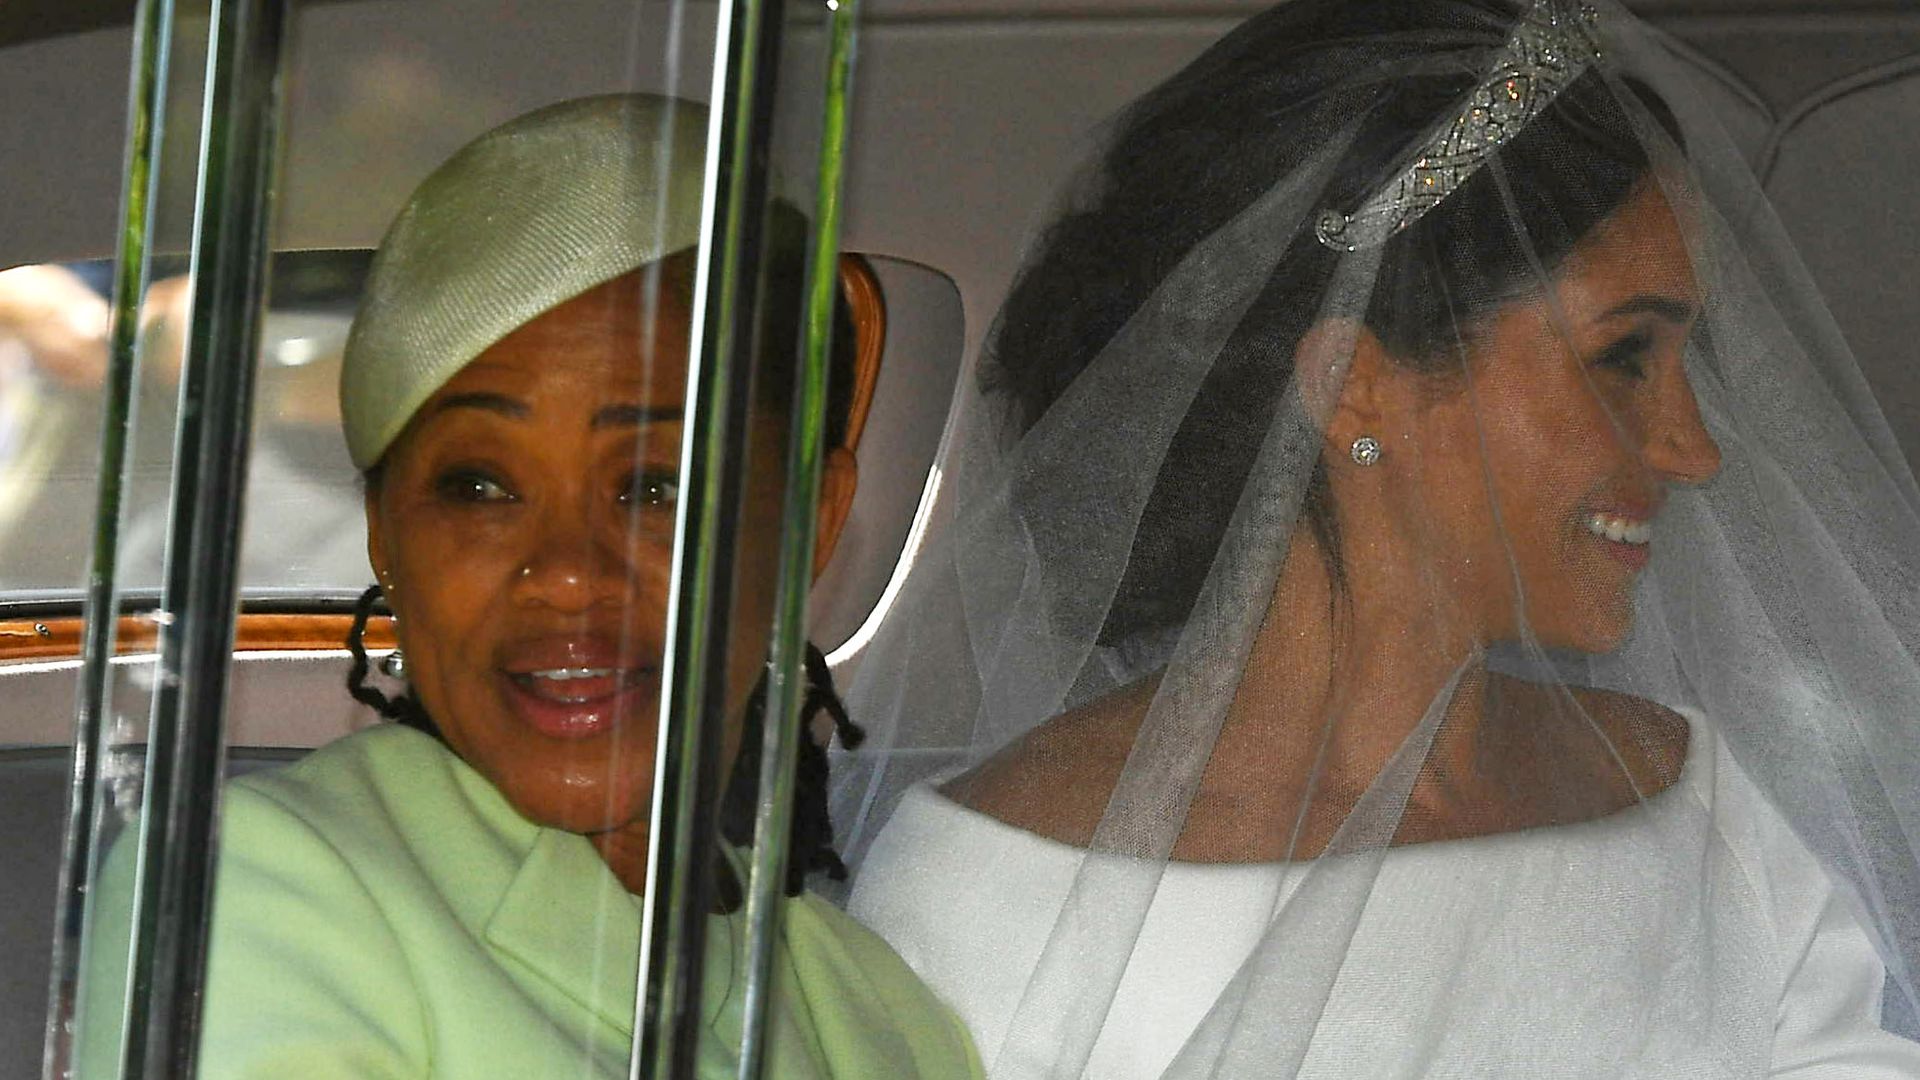 Meghan Markle and her mother Doria Ragland in the royal wedding car